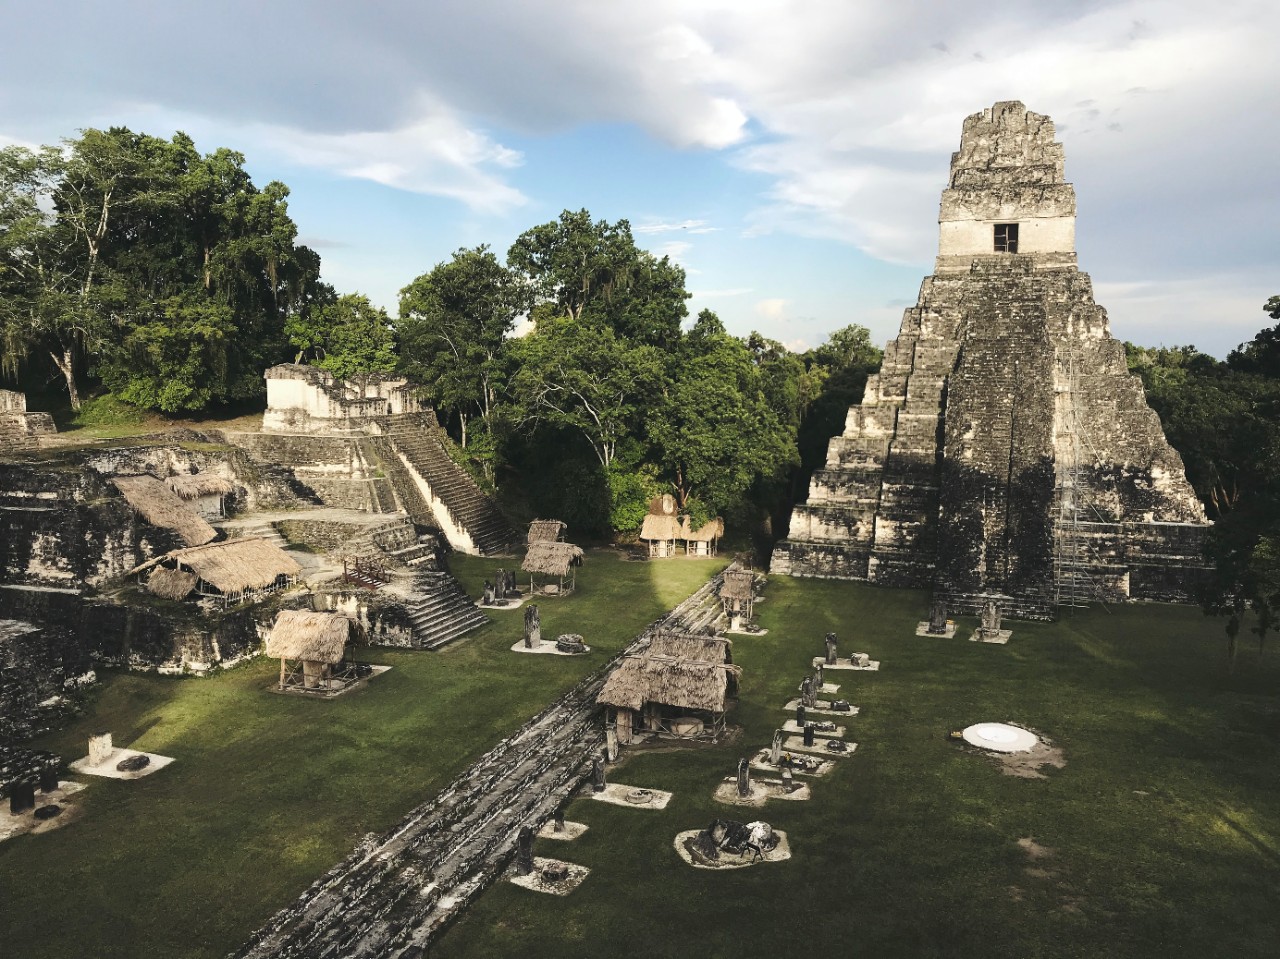 The ancient city of Tikal in Guatemala.